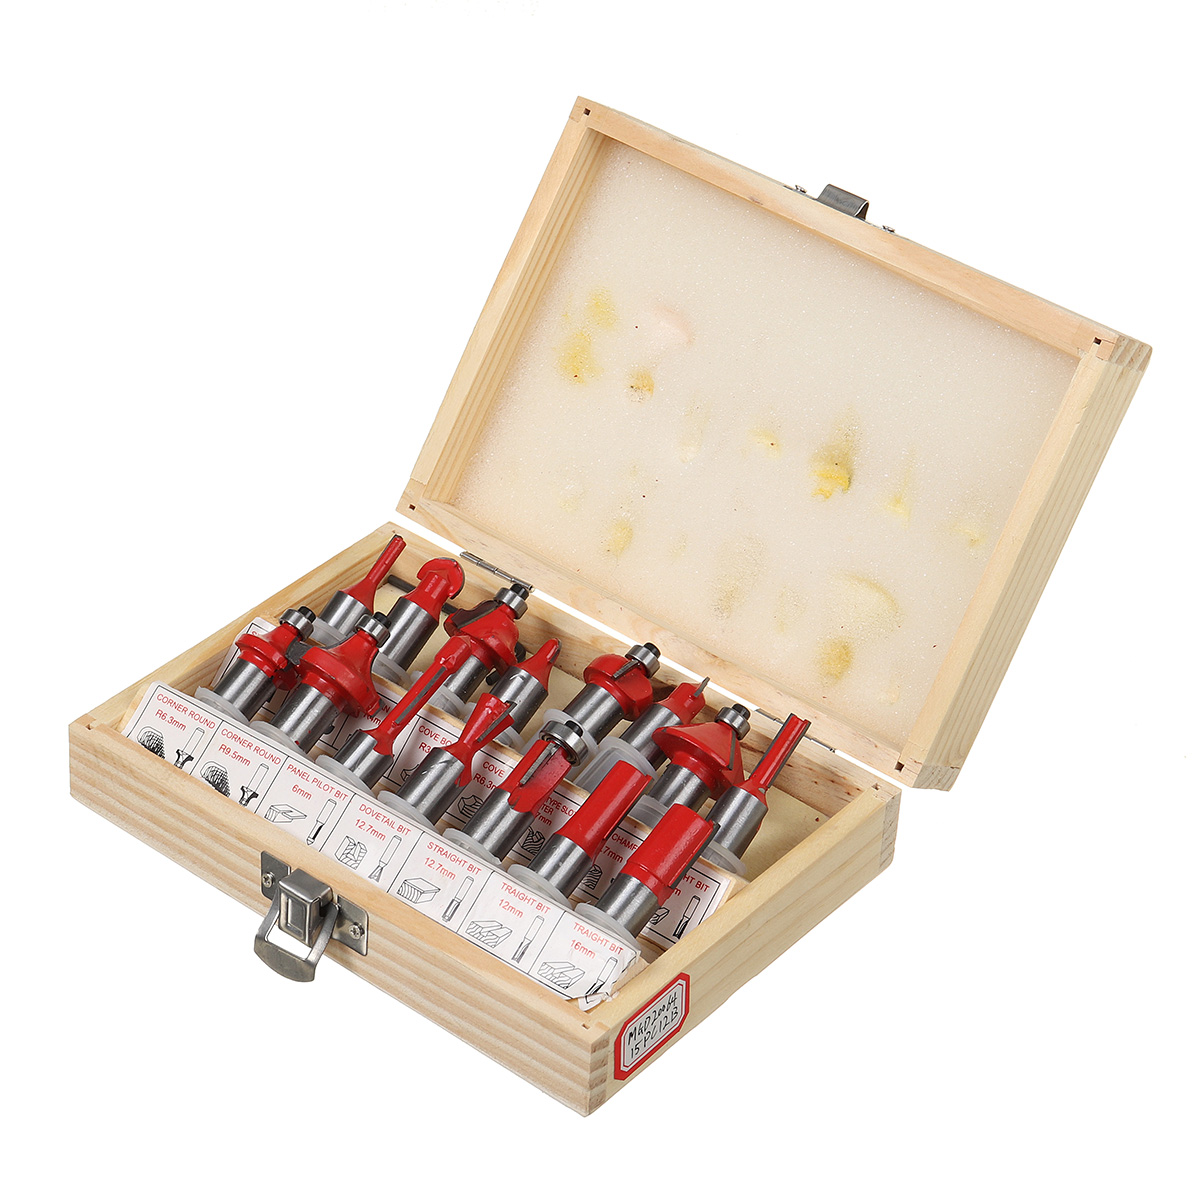 1215pcs-12-14-Inch-Milling-Cutter-Router-Bit-Set-for-Woodworking-1675937-1